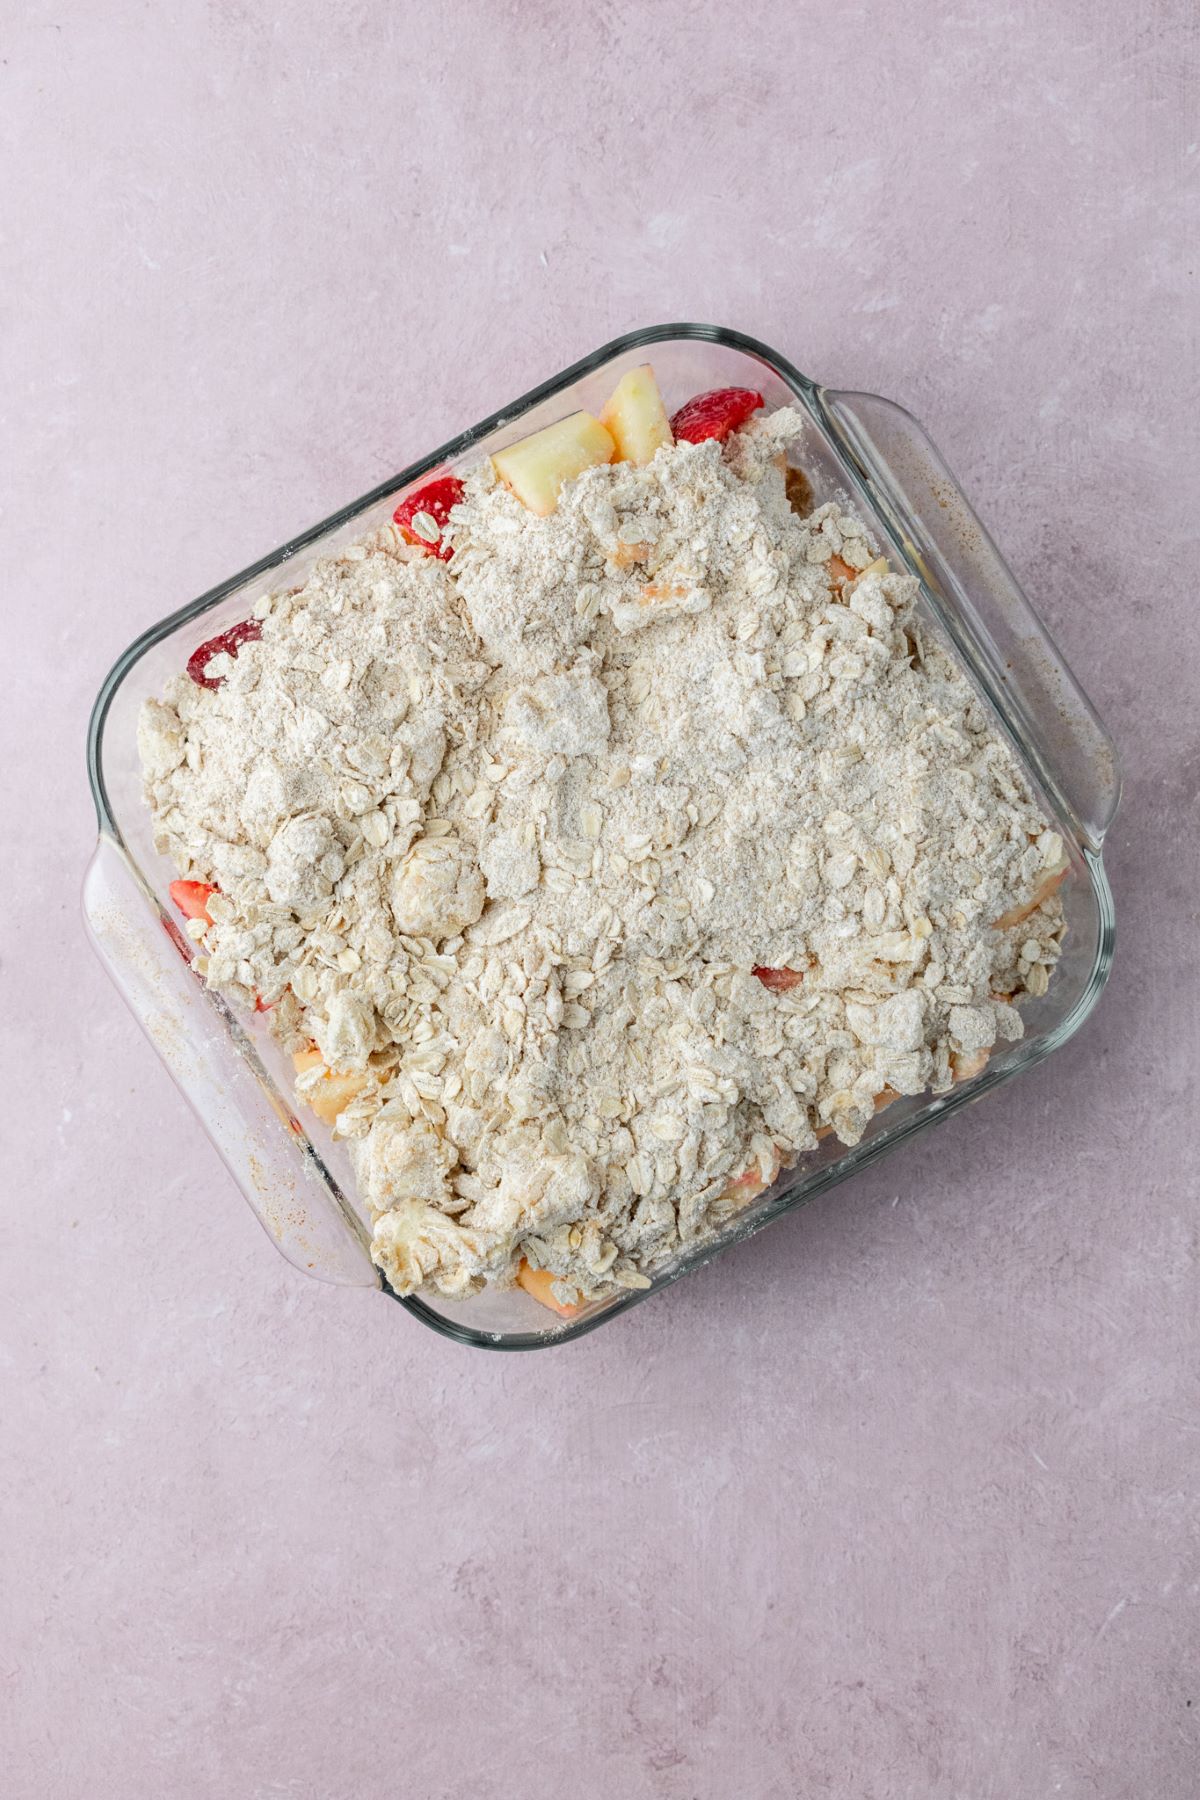 Oat streusel sprinkled over the top of fruit in a baking pan.